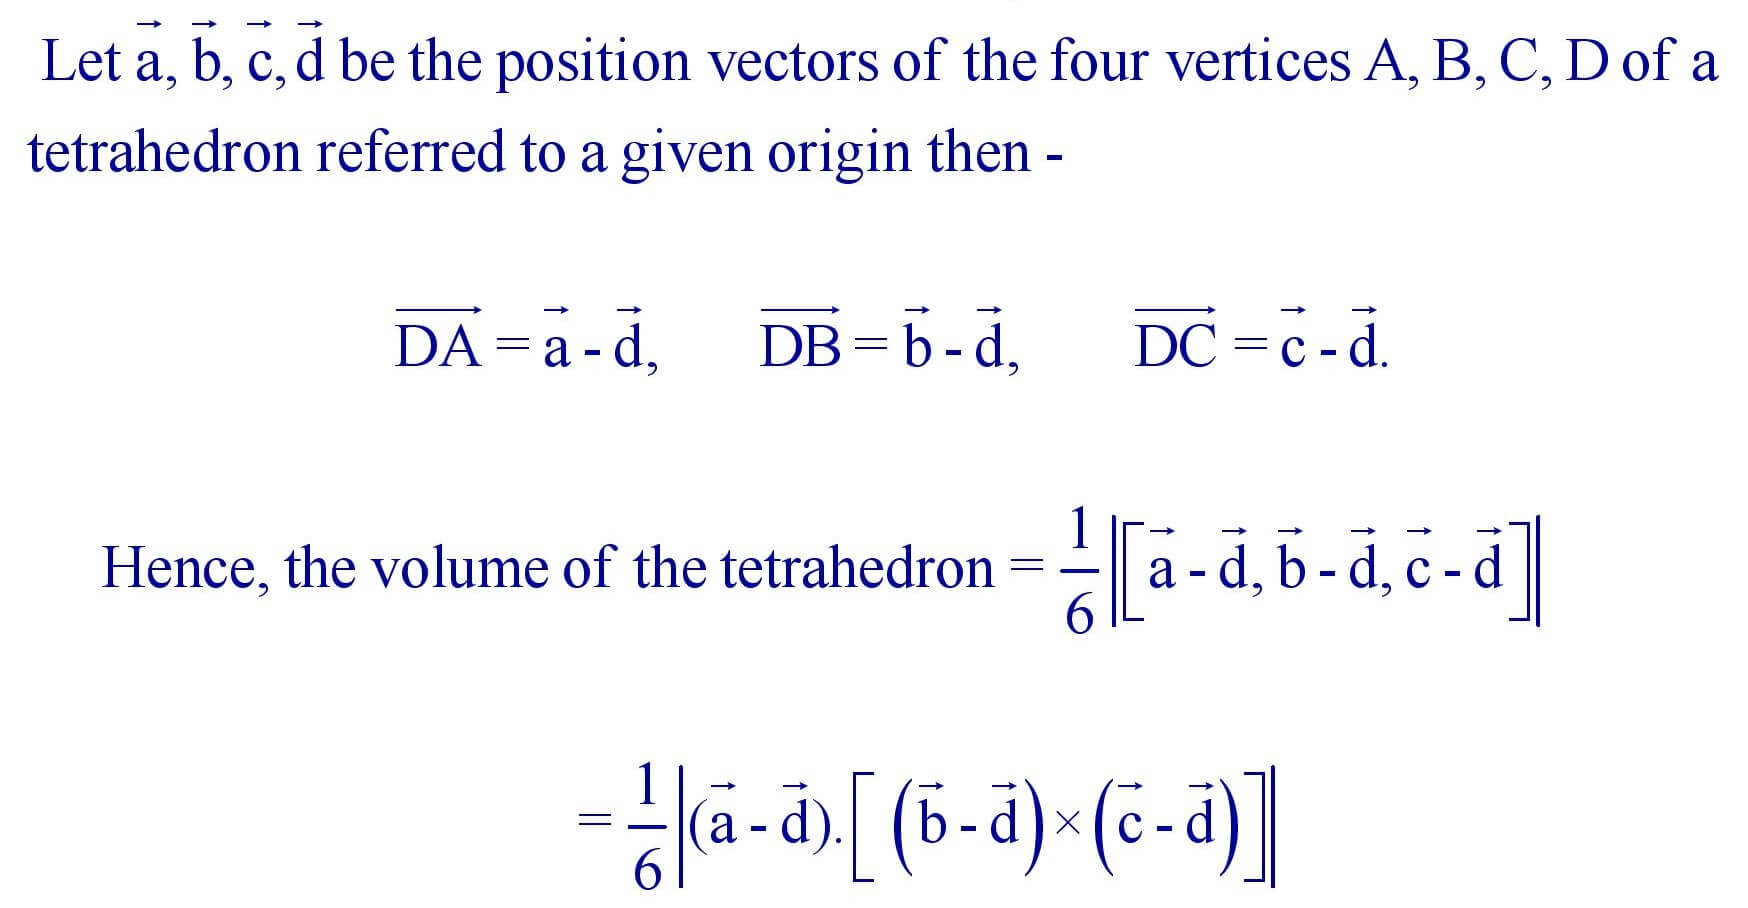 Volume of tetrahedron in terms of the position vectors of its four vertices